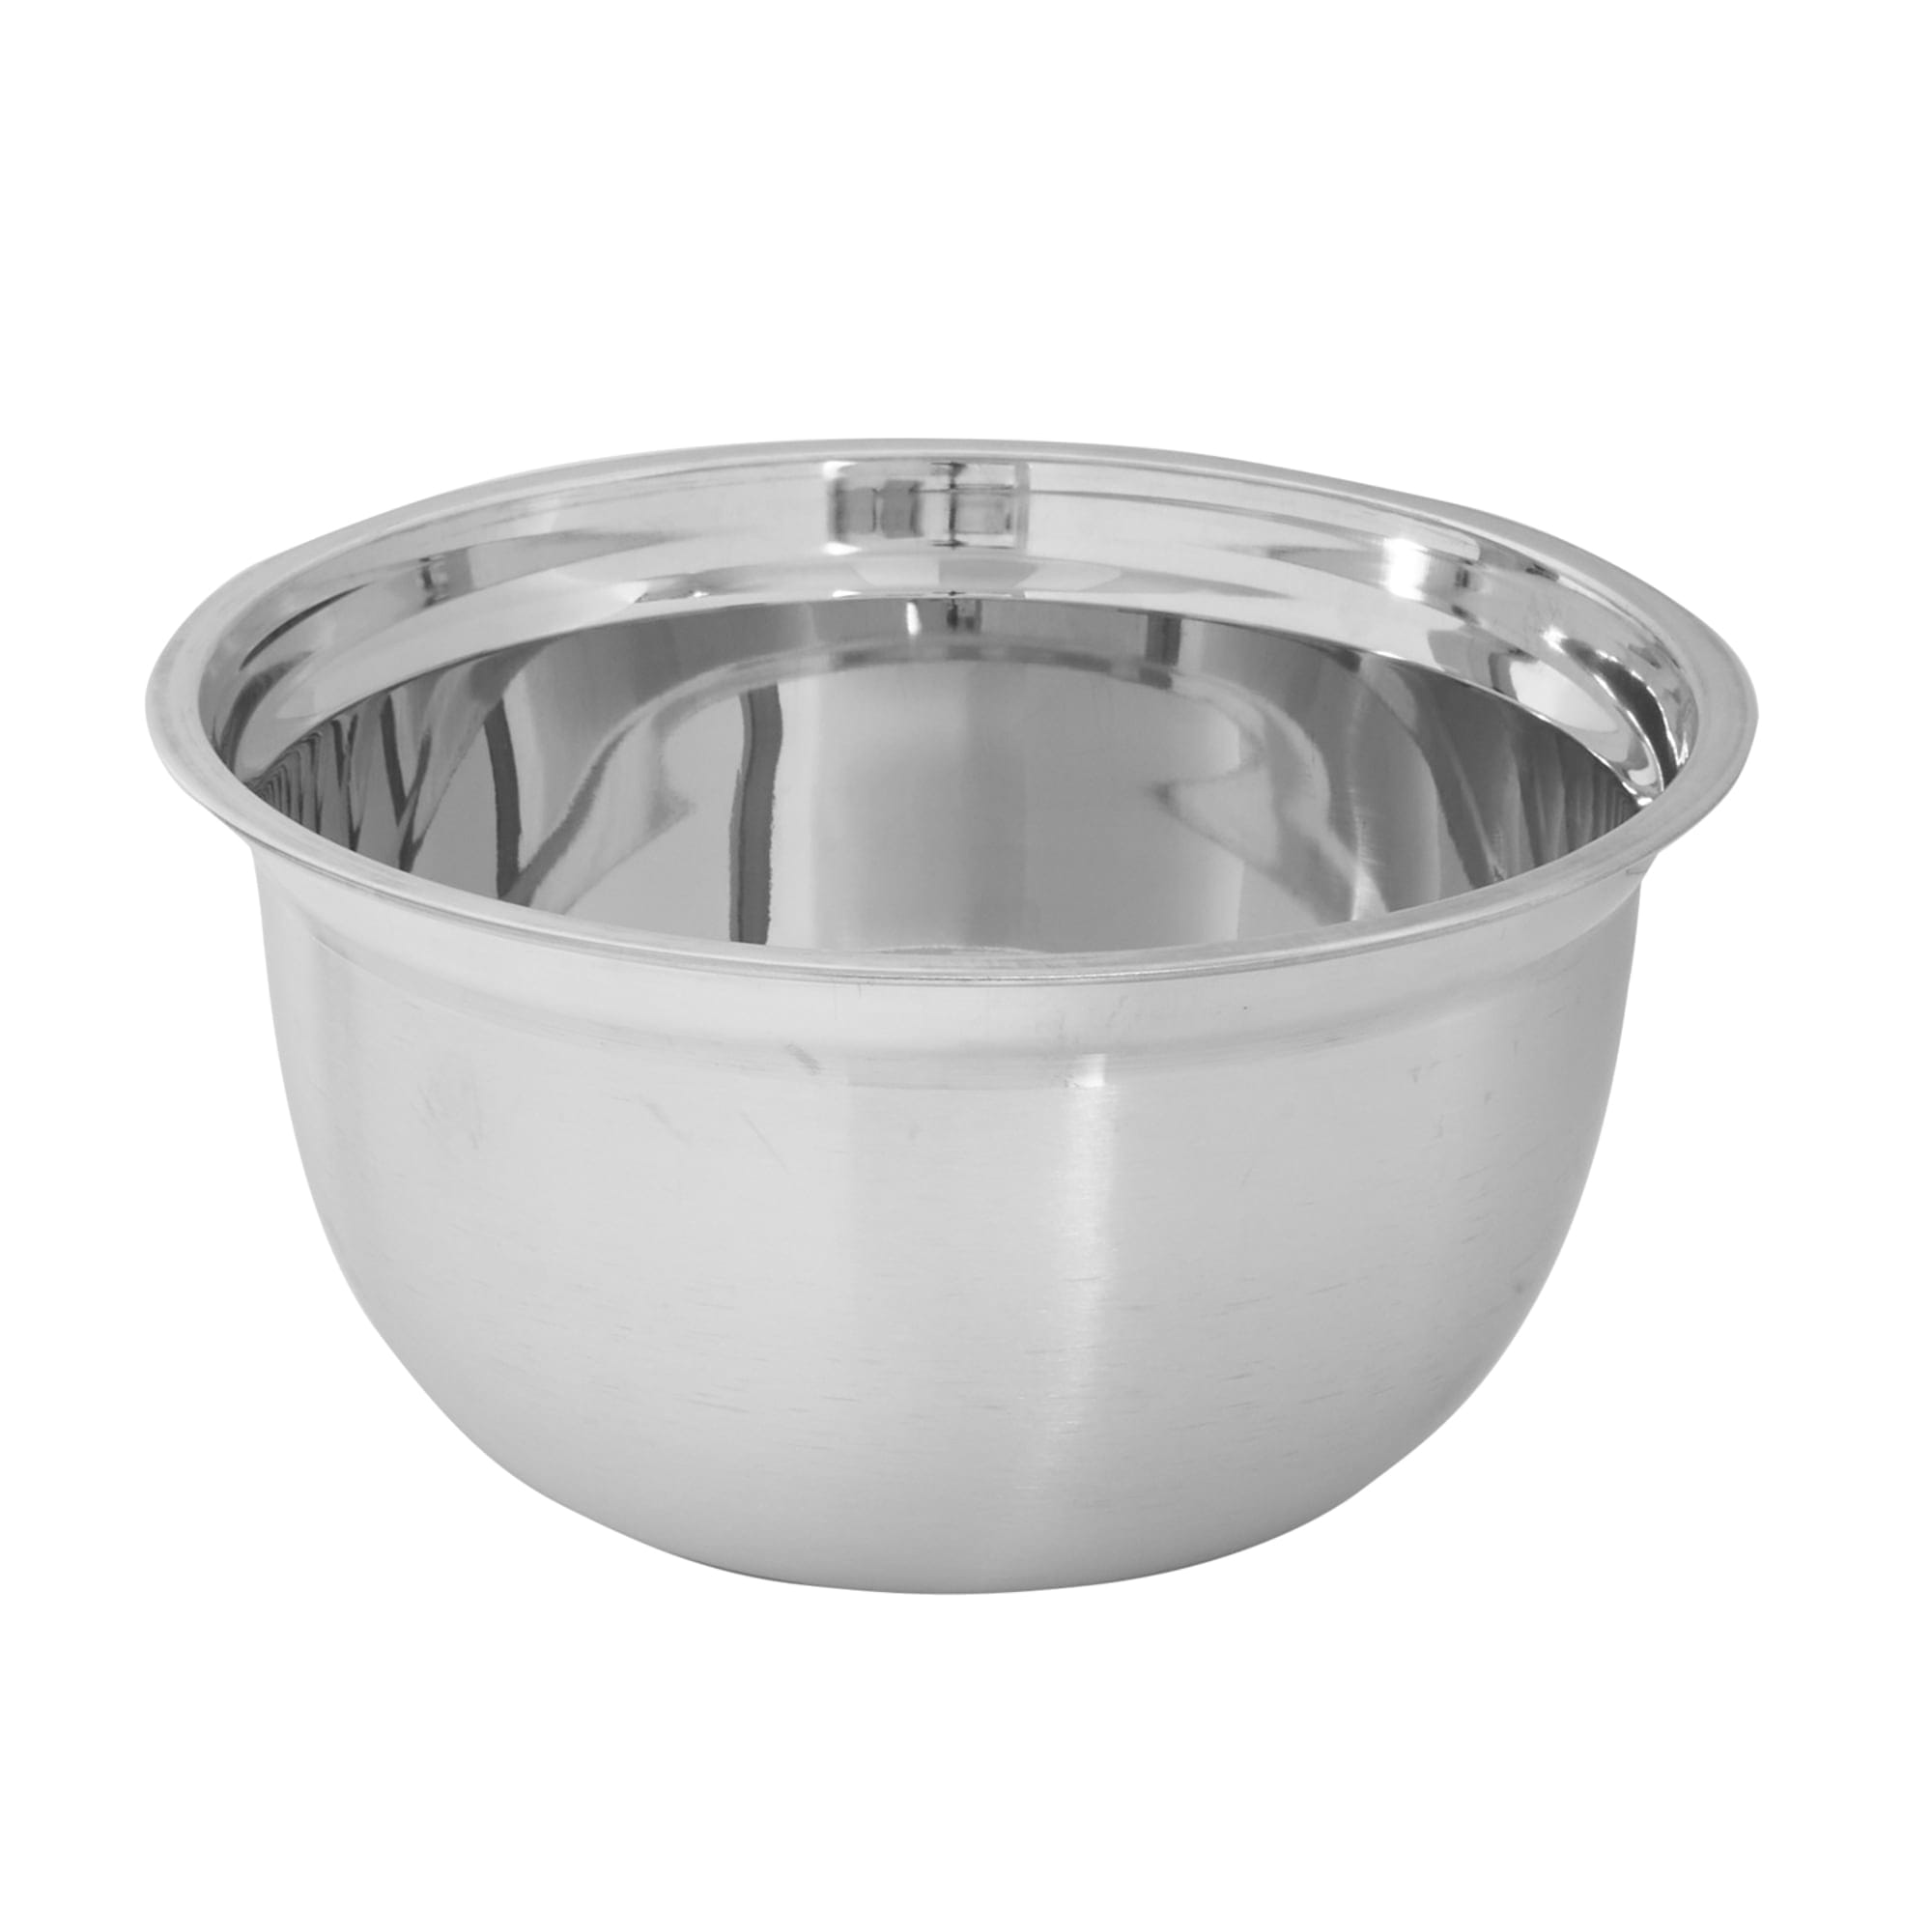 Home Basics 5 QT Stainless Steel Beveled Anti-Skid Mixing Bowl, Silver $5.00 EACH, CASE PACK OF 24